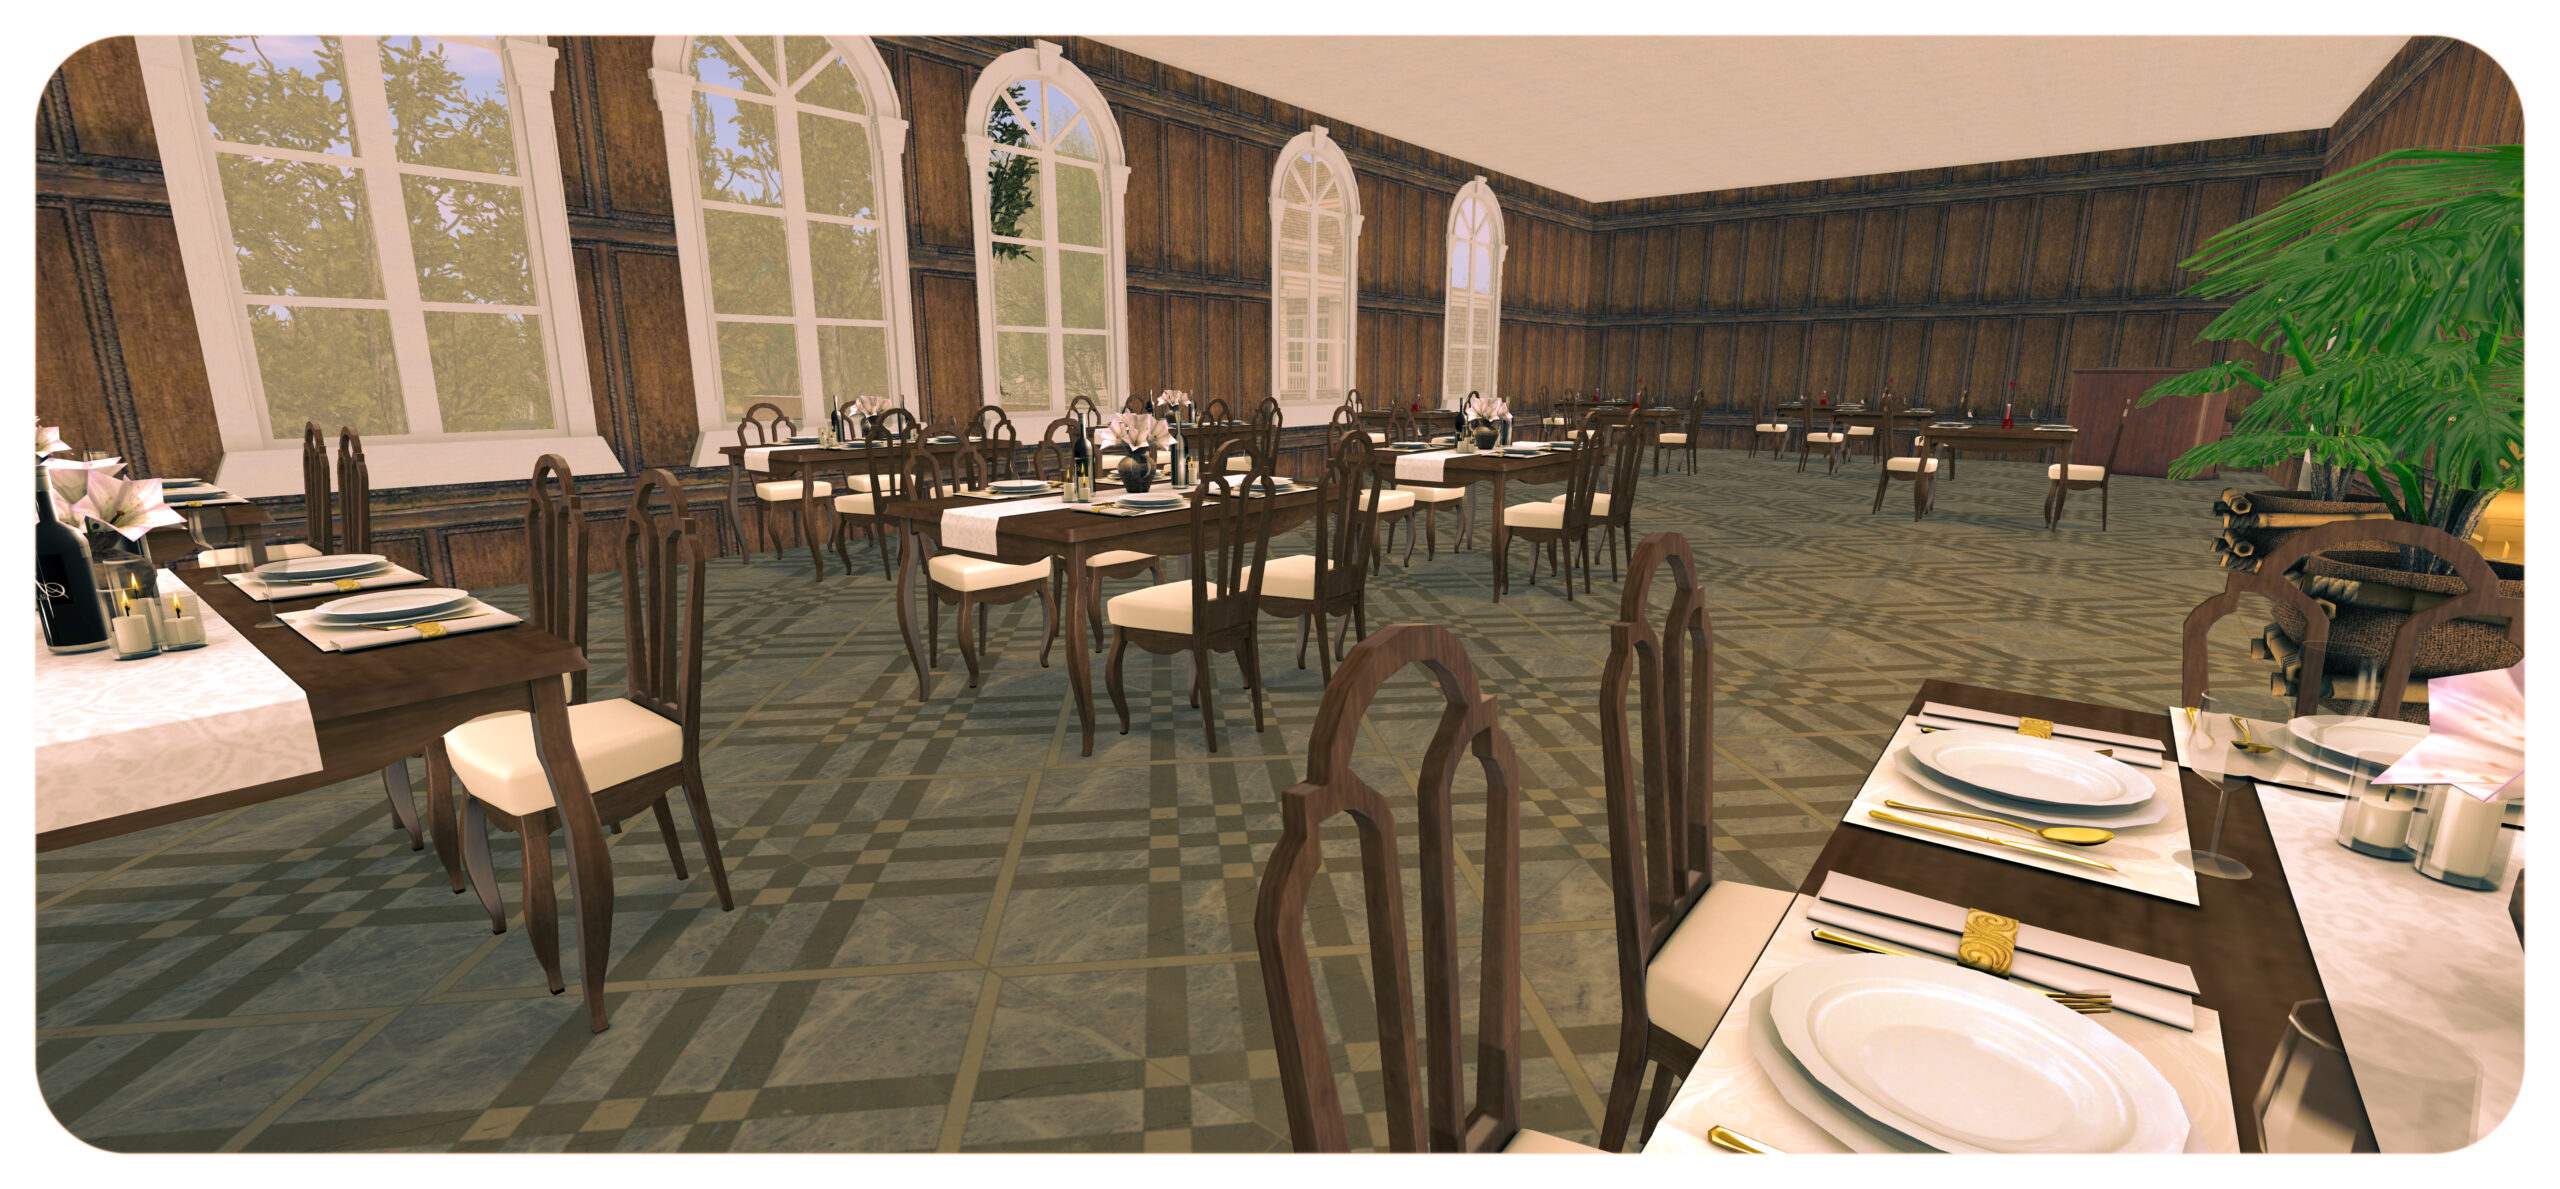 View of the dining room at Cacciatore